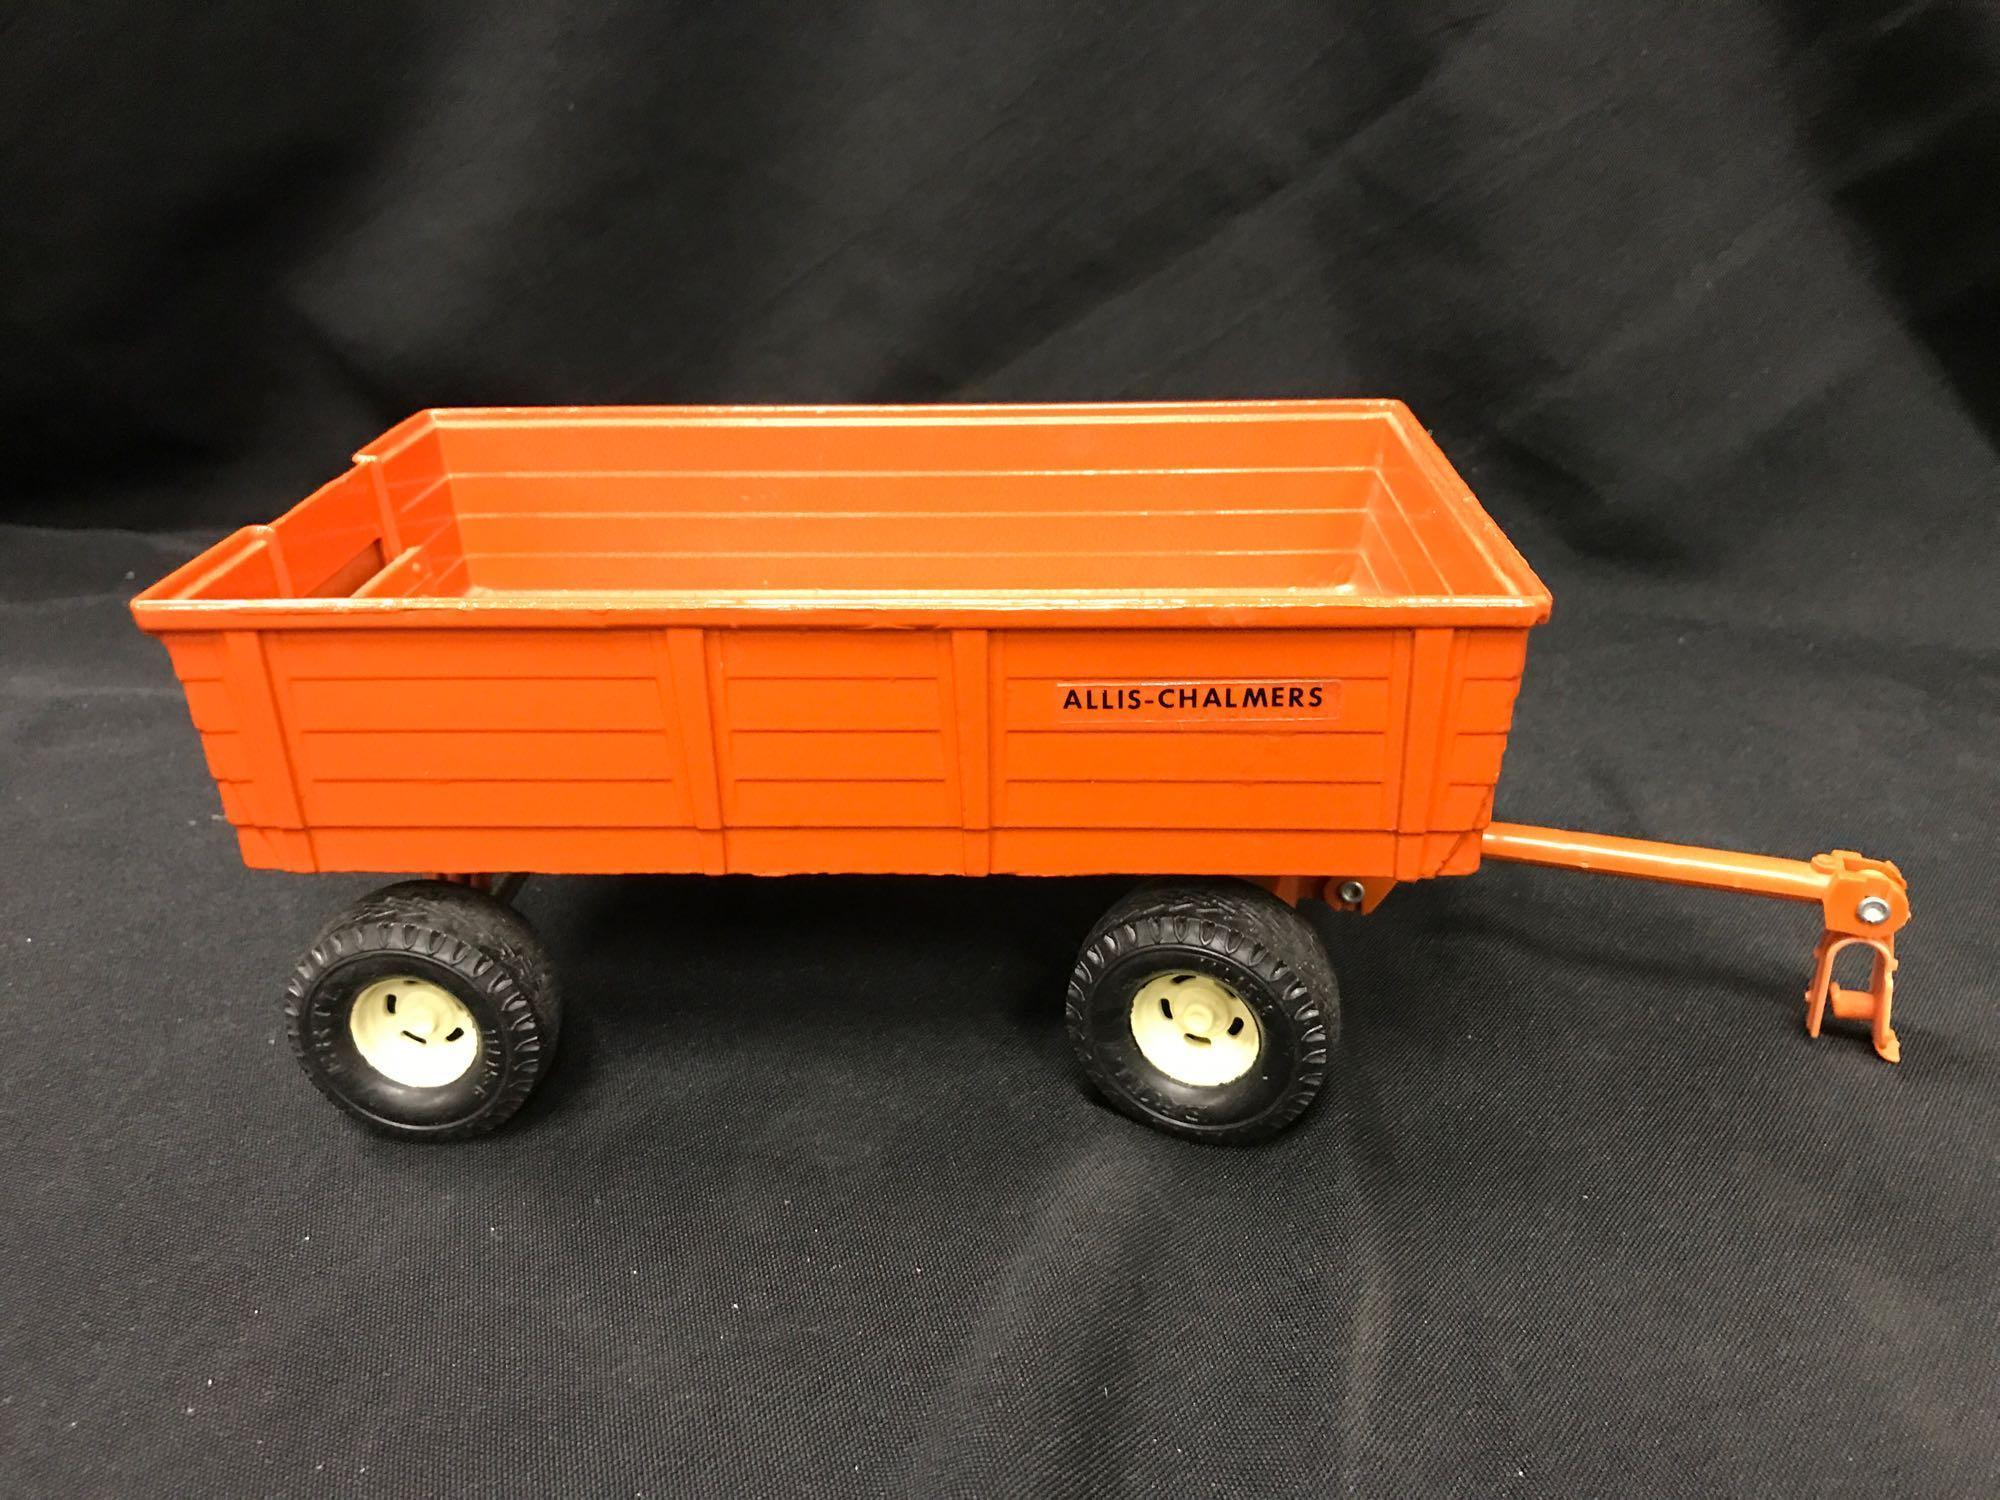 Allis Chalmers "D-17" Tractor and Barge Wagon